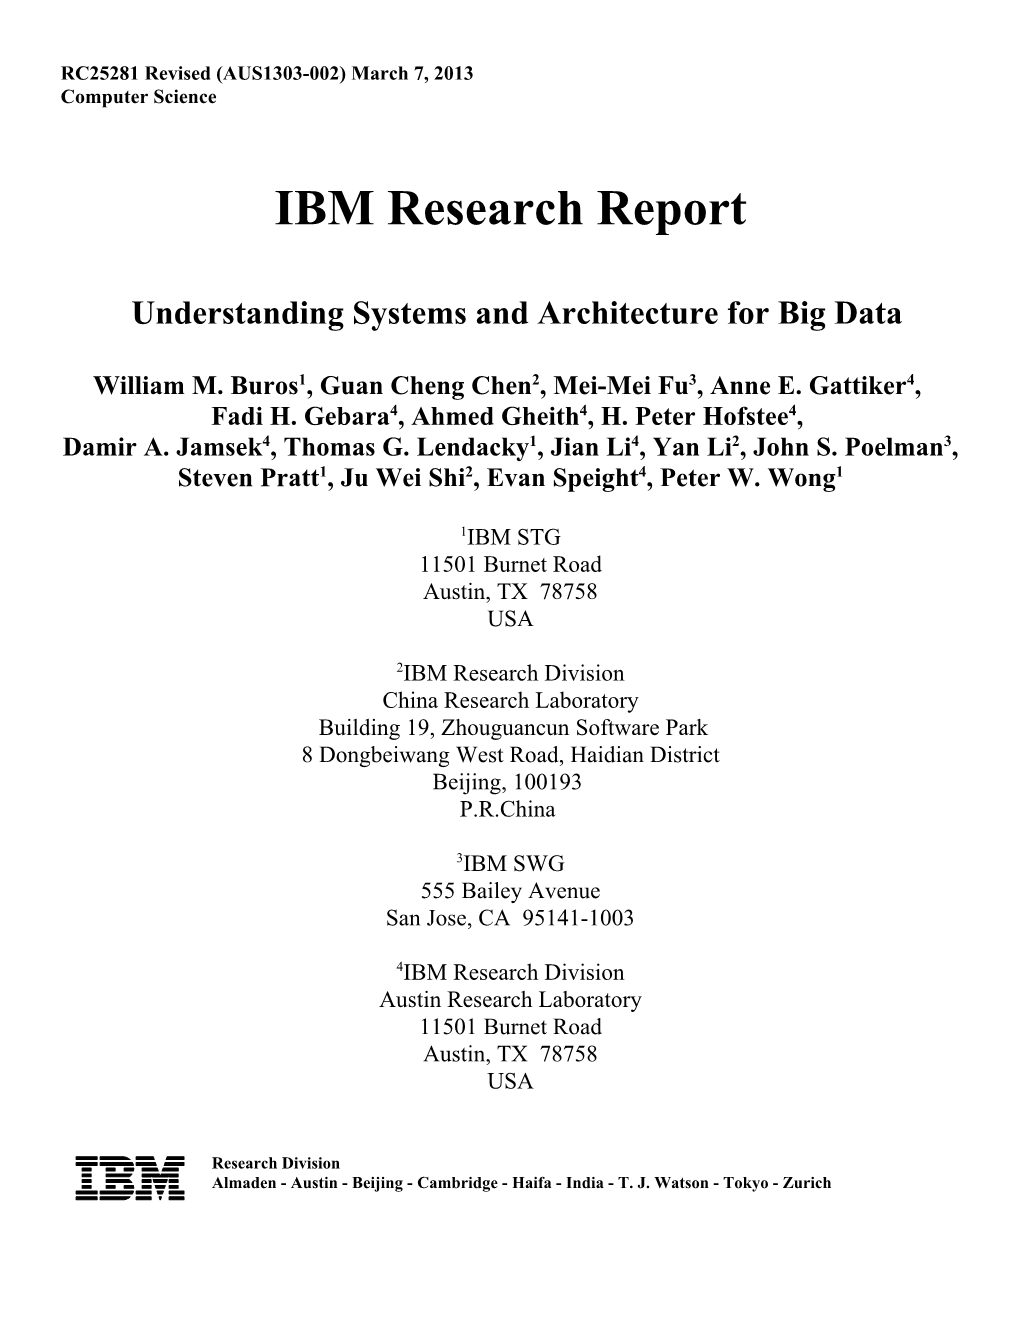 Understanding Systems and Architecture for Big Data